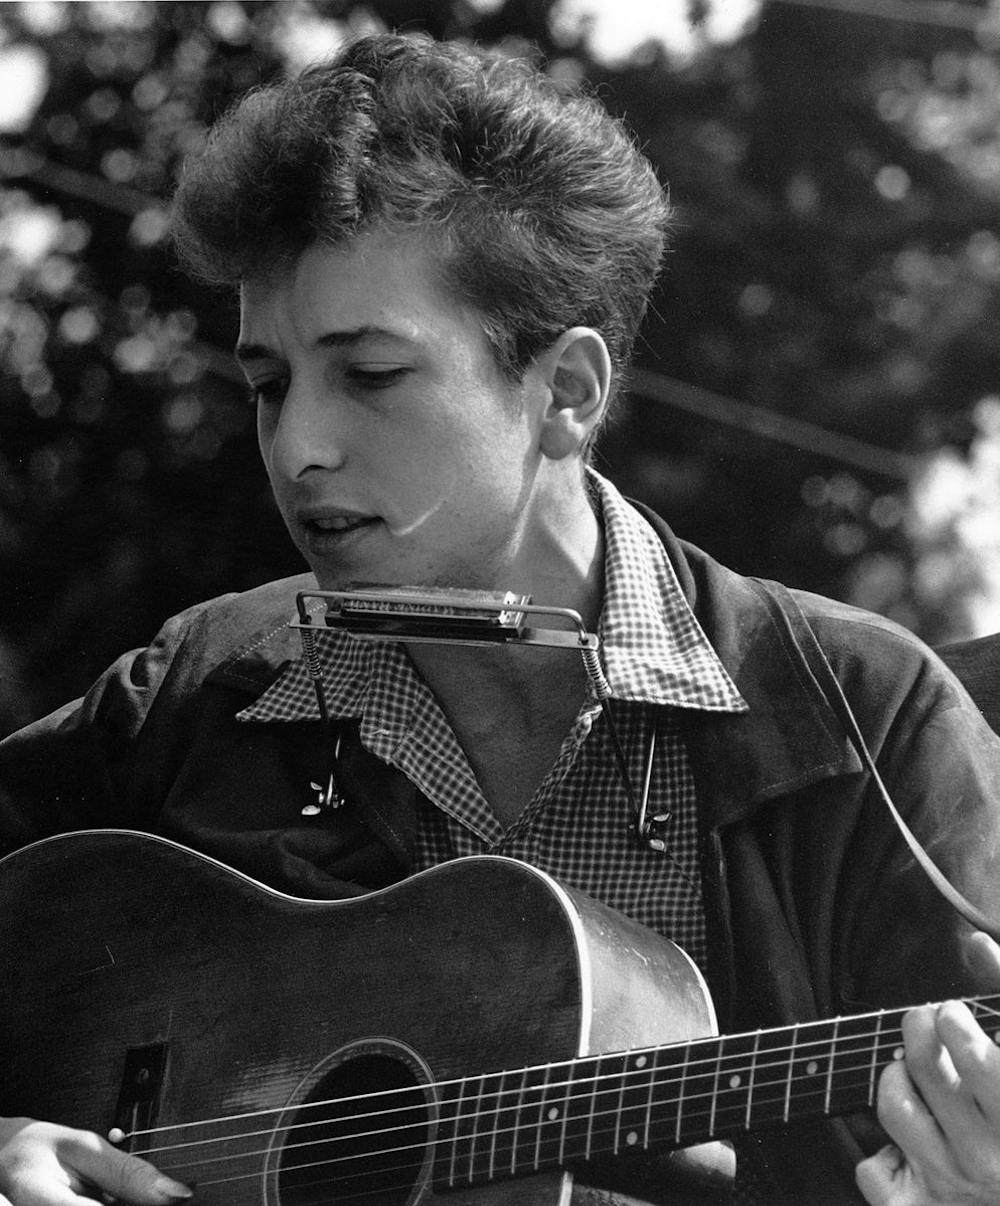 <p><em>Because Bob Dylan is lauded as one of the greatest American songwriters of all time, this presents a unique set of challenges when adapting his life to the big screen. (Photo courtesy of </em><a href="https://commons.wikimedia.org/wiki/File:Joan_Baez_Bob_Dylan_crop.jpg" target=""><em>Wikimedia Commons</em></a><em>)</em></p>